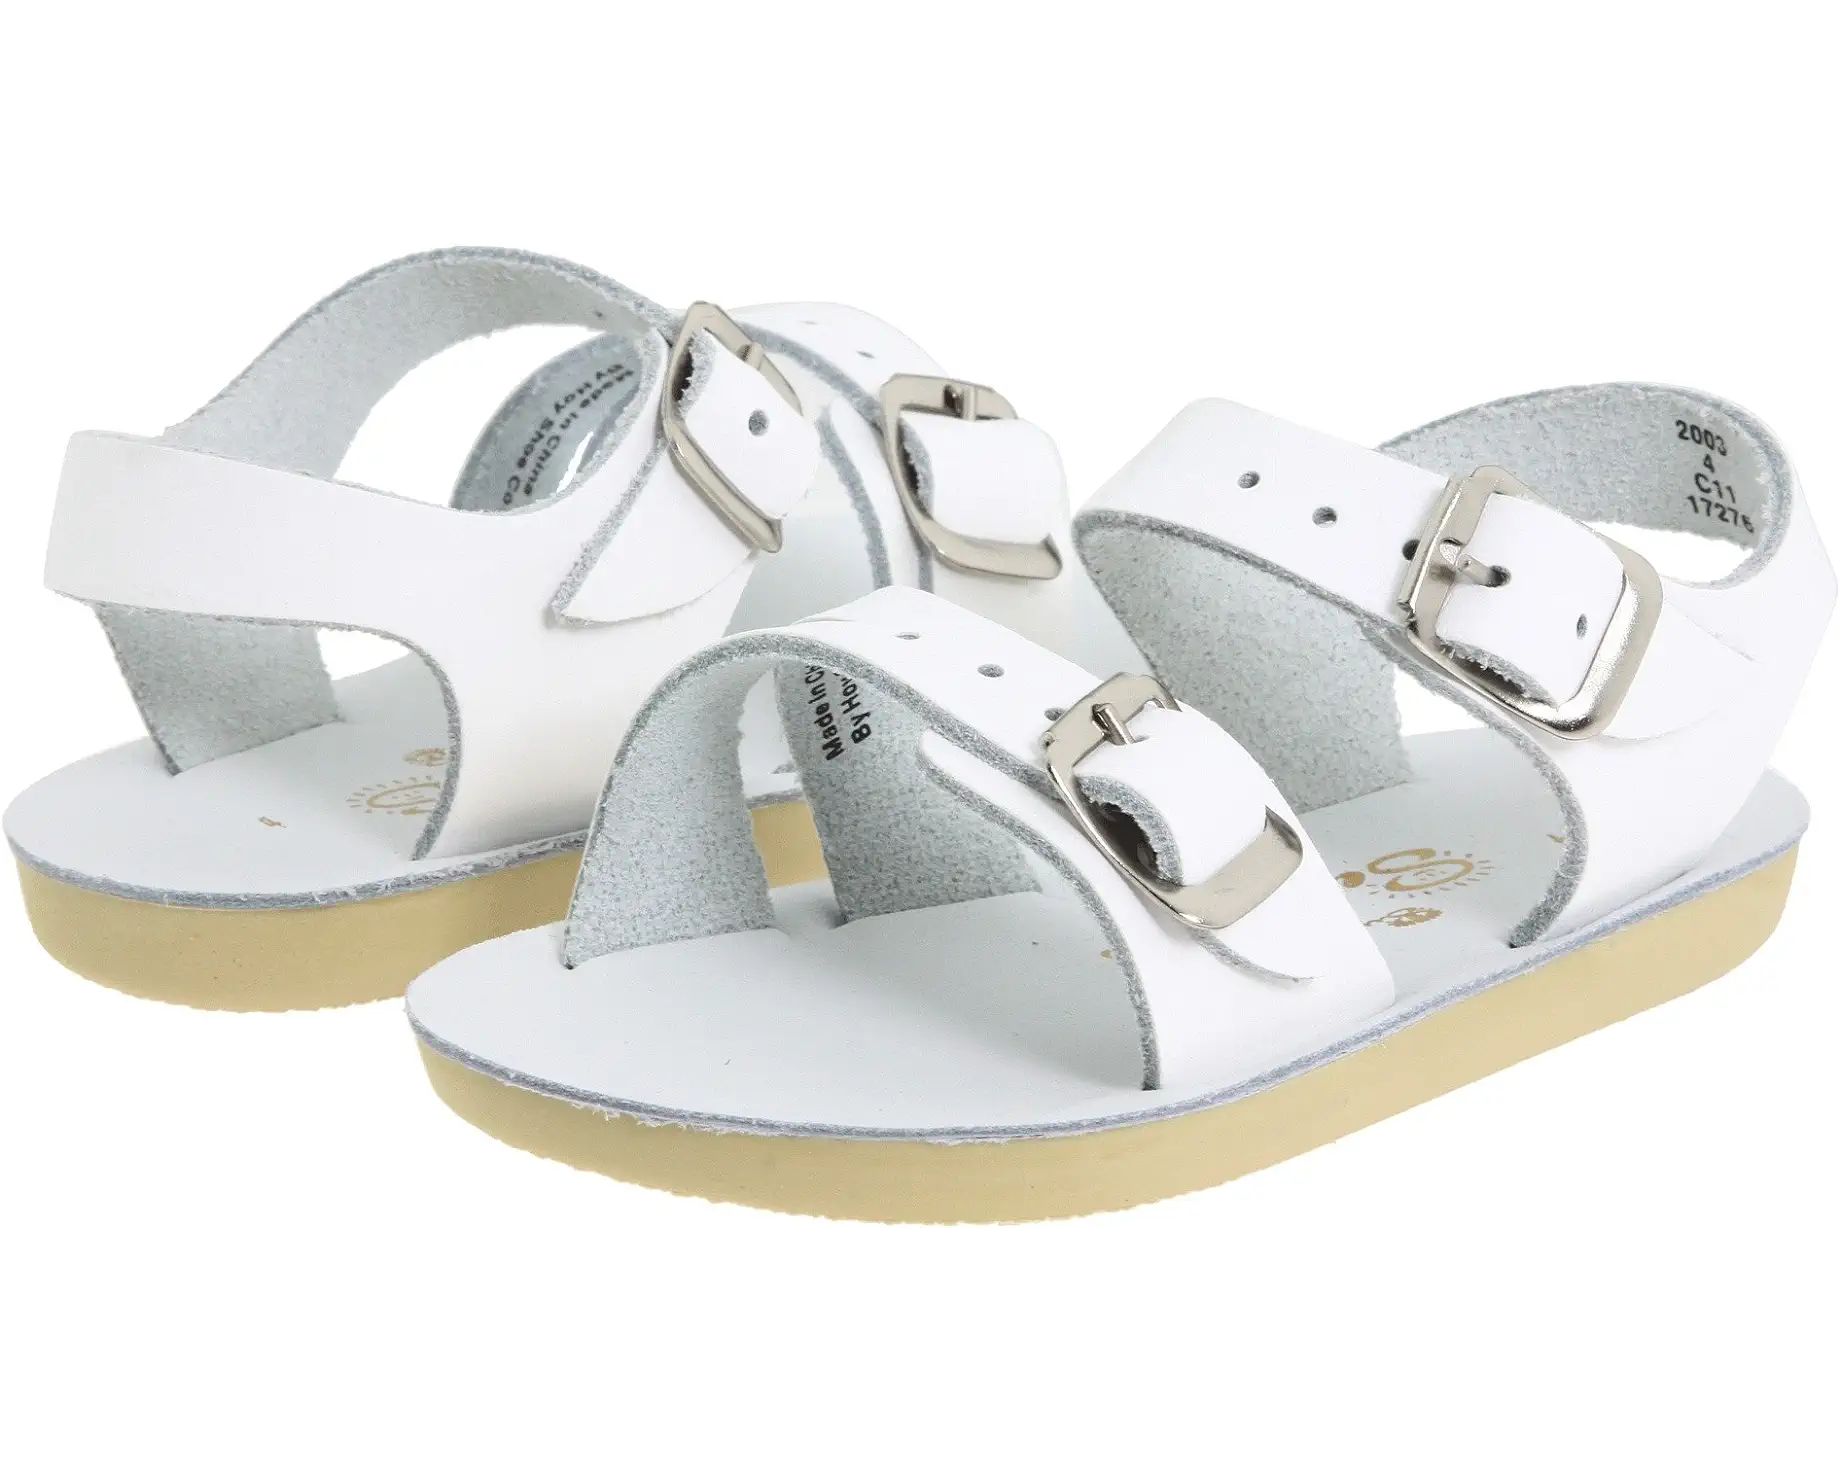 Salt Water Sandal by Hoy Shoes | Zappos